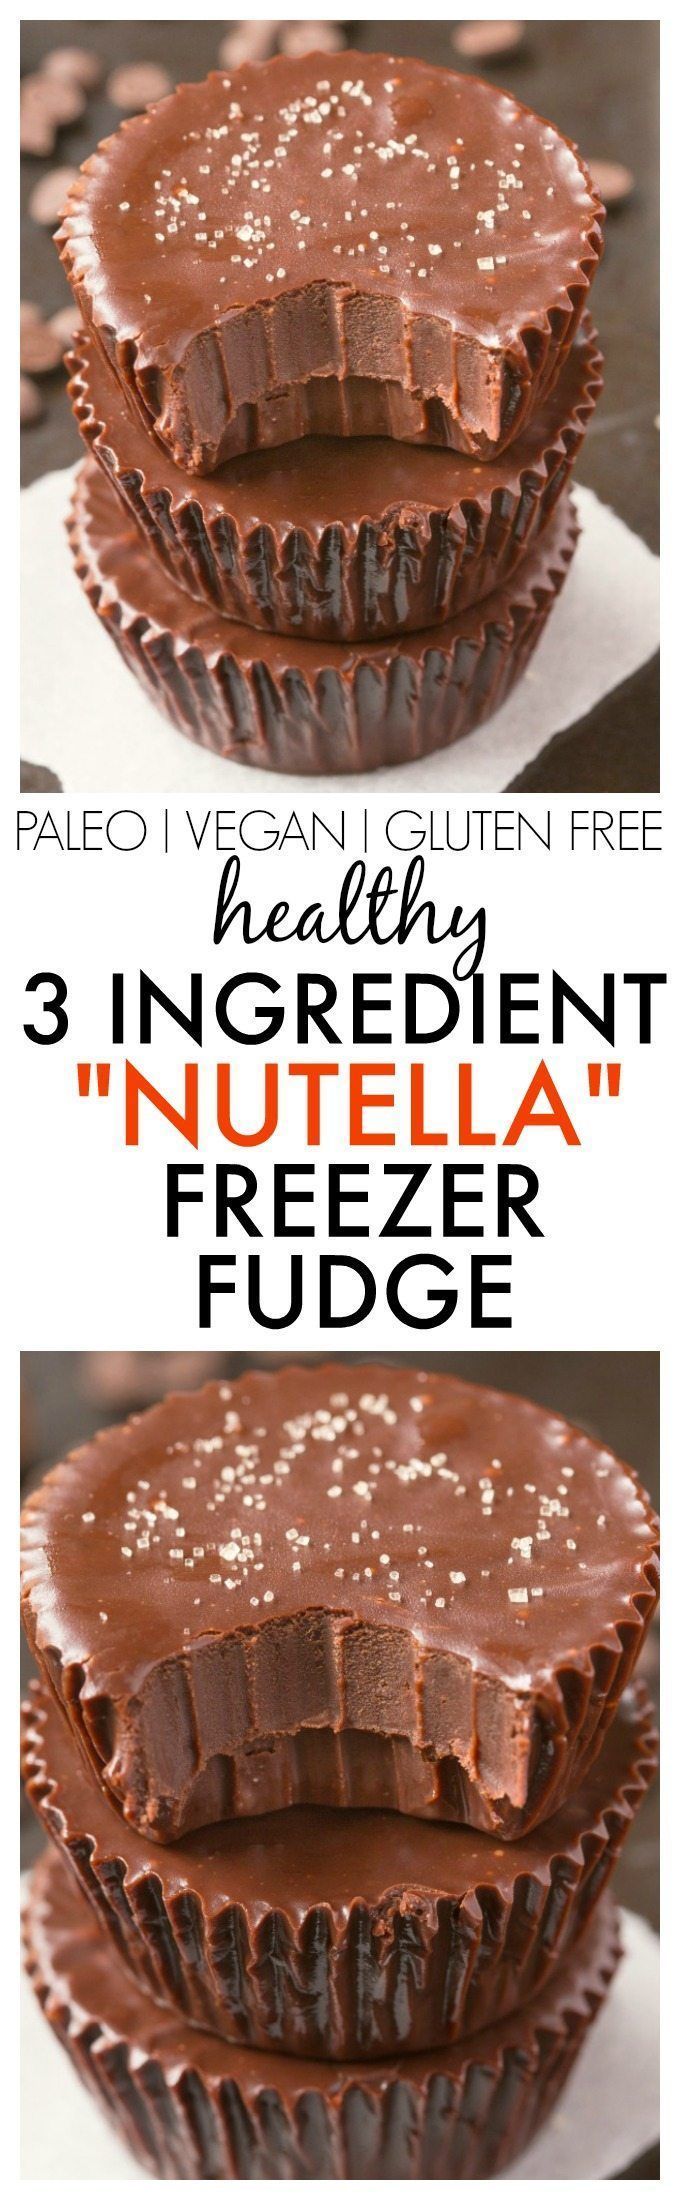 Healthy 3 Ingredient ‘Nutella’ Fudge Cups- Smooth, creamy and melt-in-your mouth fudge which takes minutes and has NO dairy,